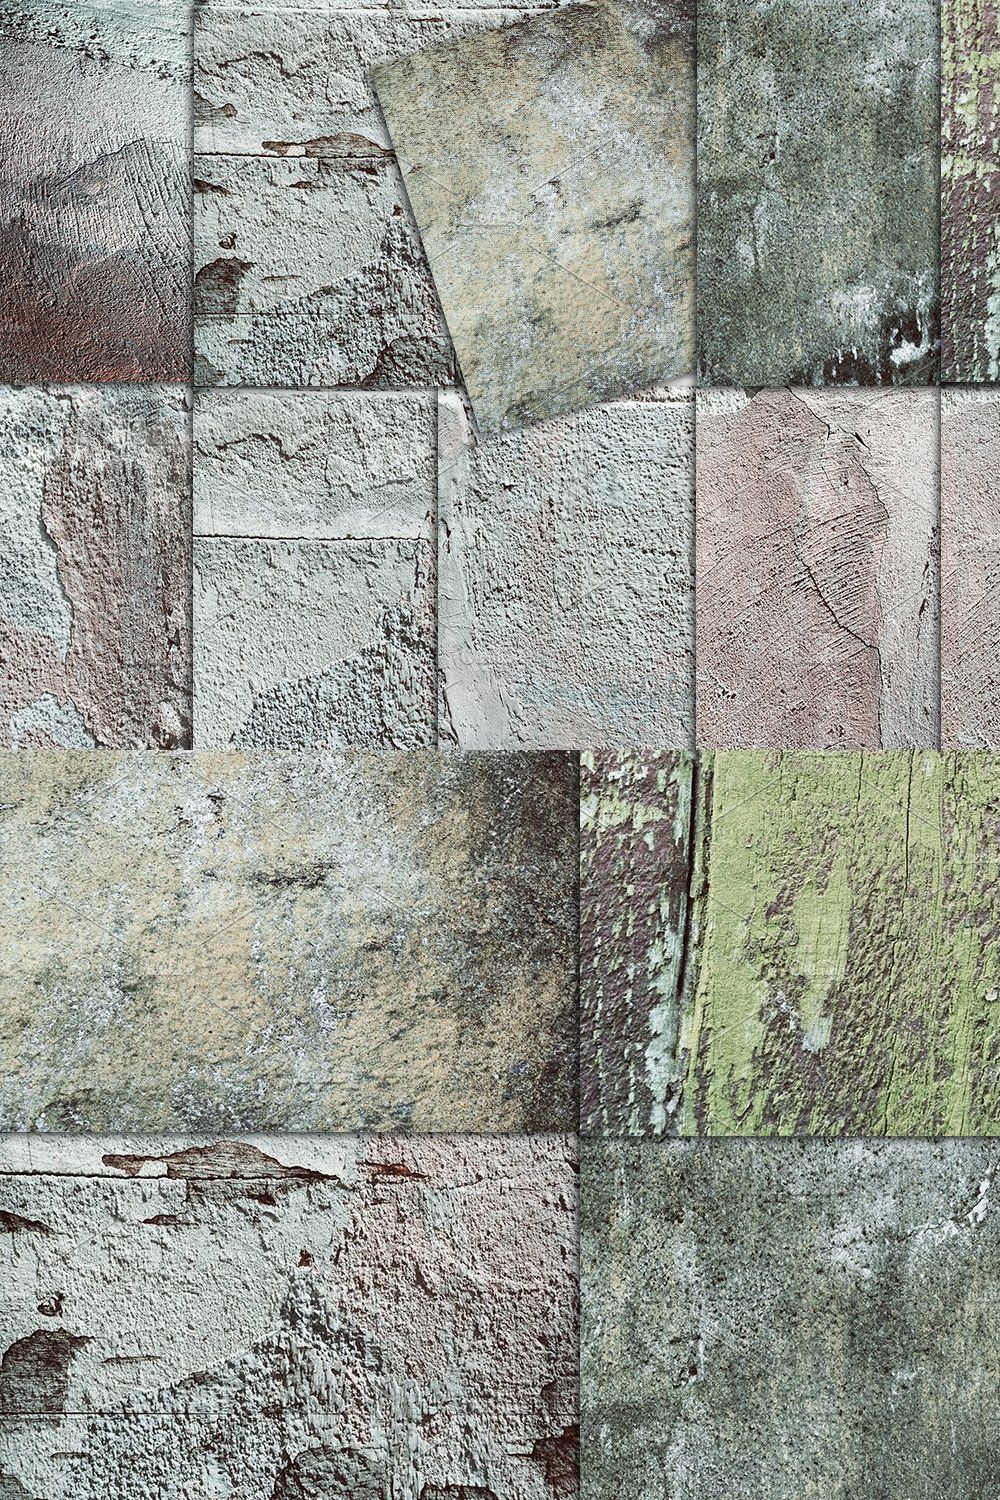 Concrete wall distressed textures pinterest preview image.